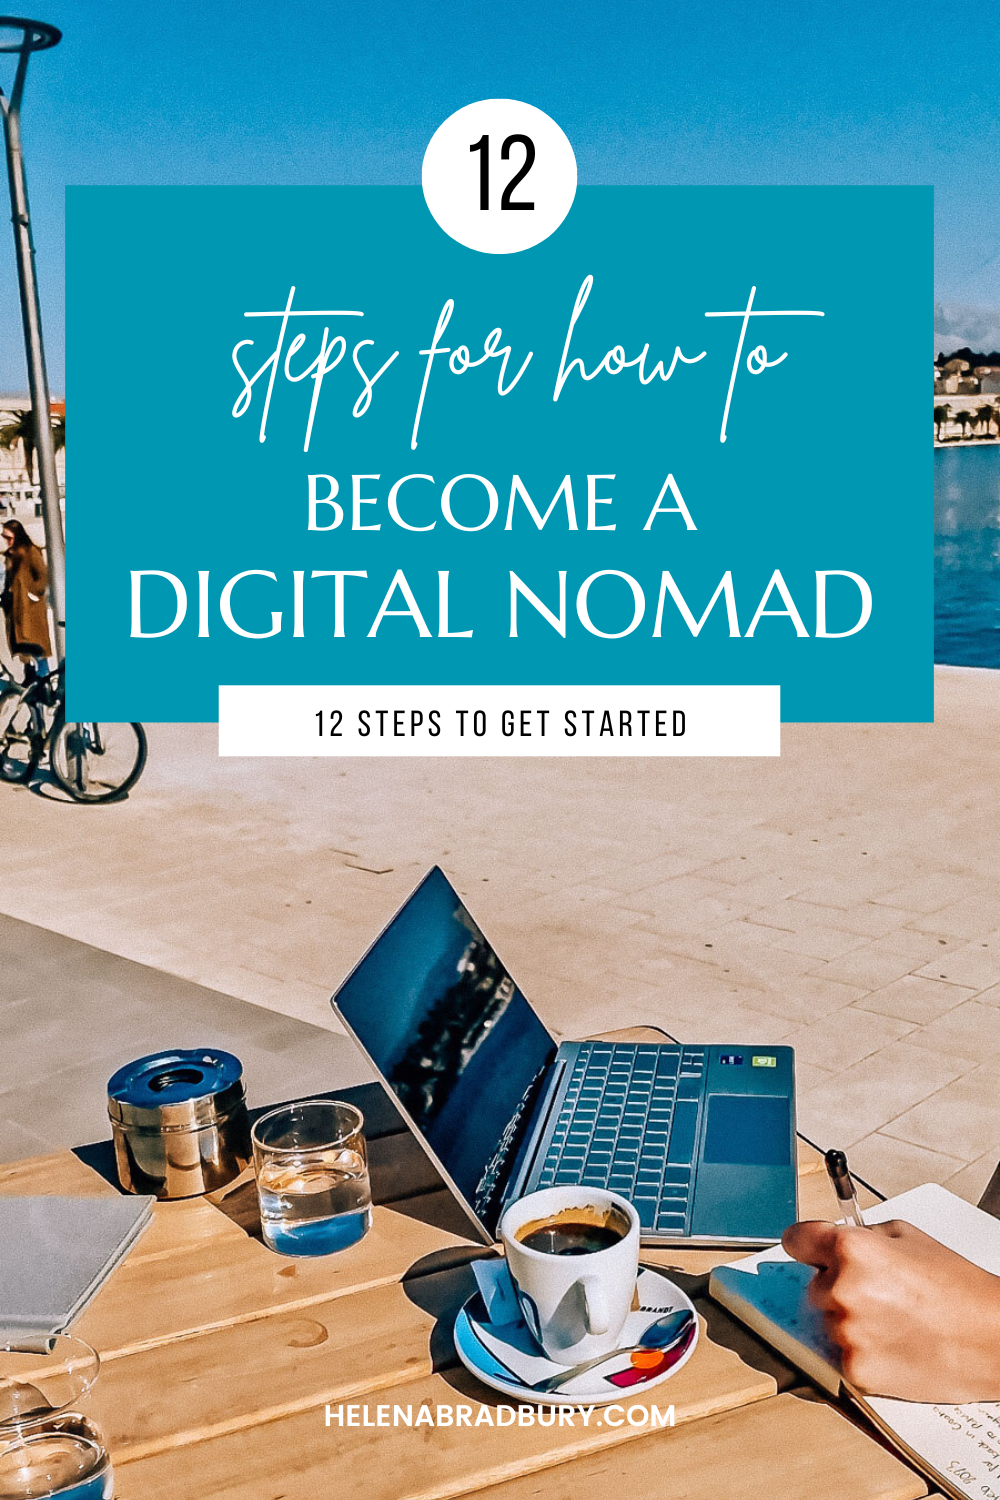 How to get started as a digital nomad? This is a question I’m commonly asked. There’s no one simple answer, so I’ve summarised 12 steps to becoming a digital nomad to help you prepare before you take the leap. | how to become a digital nomad | how to